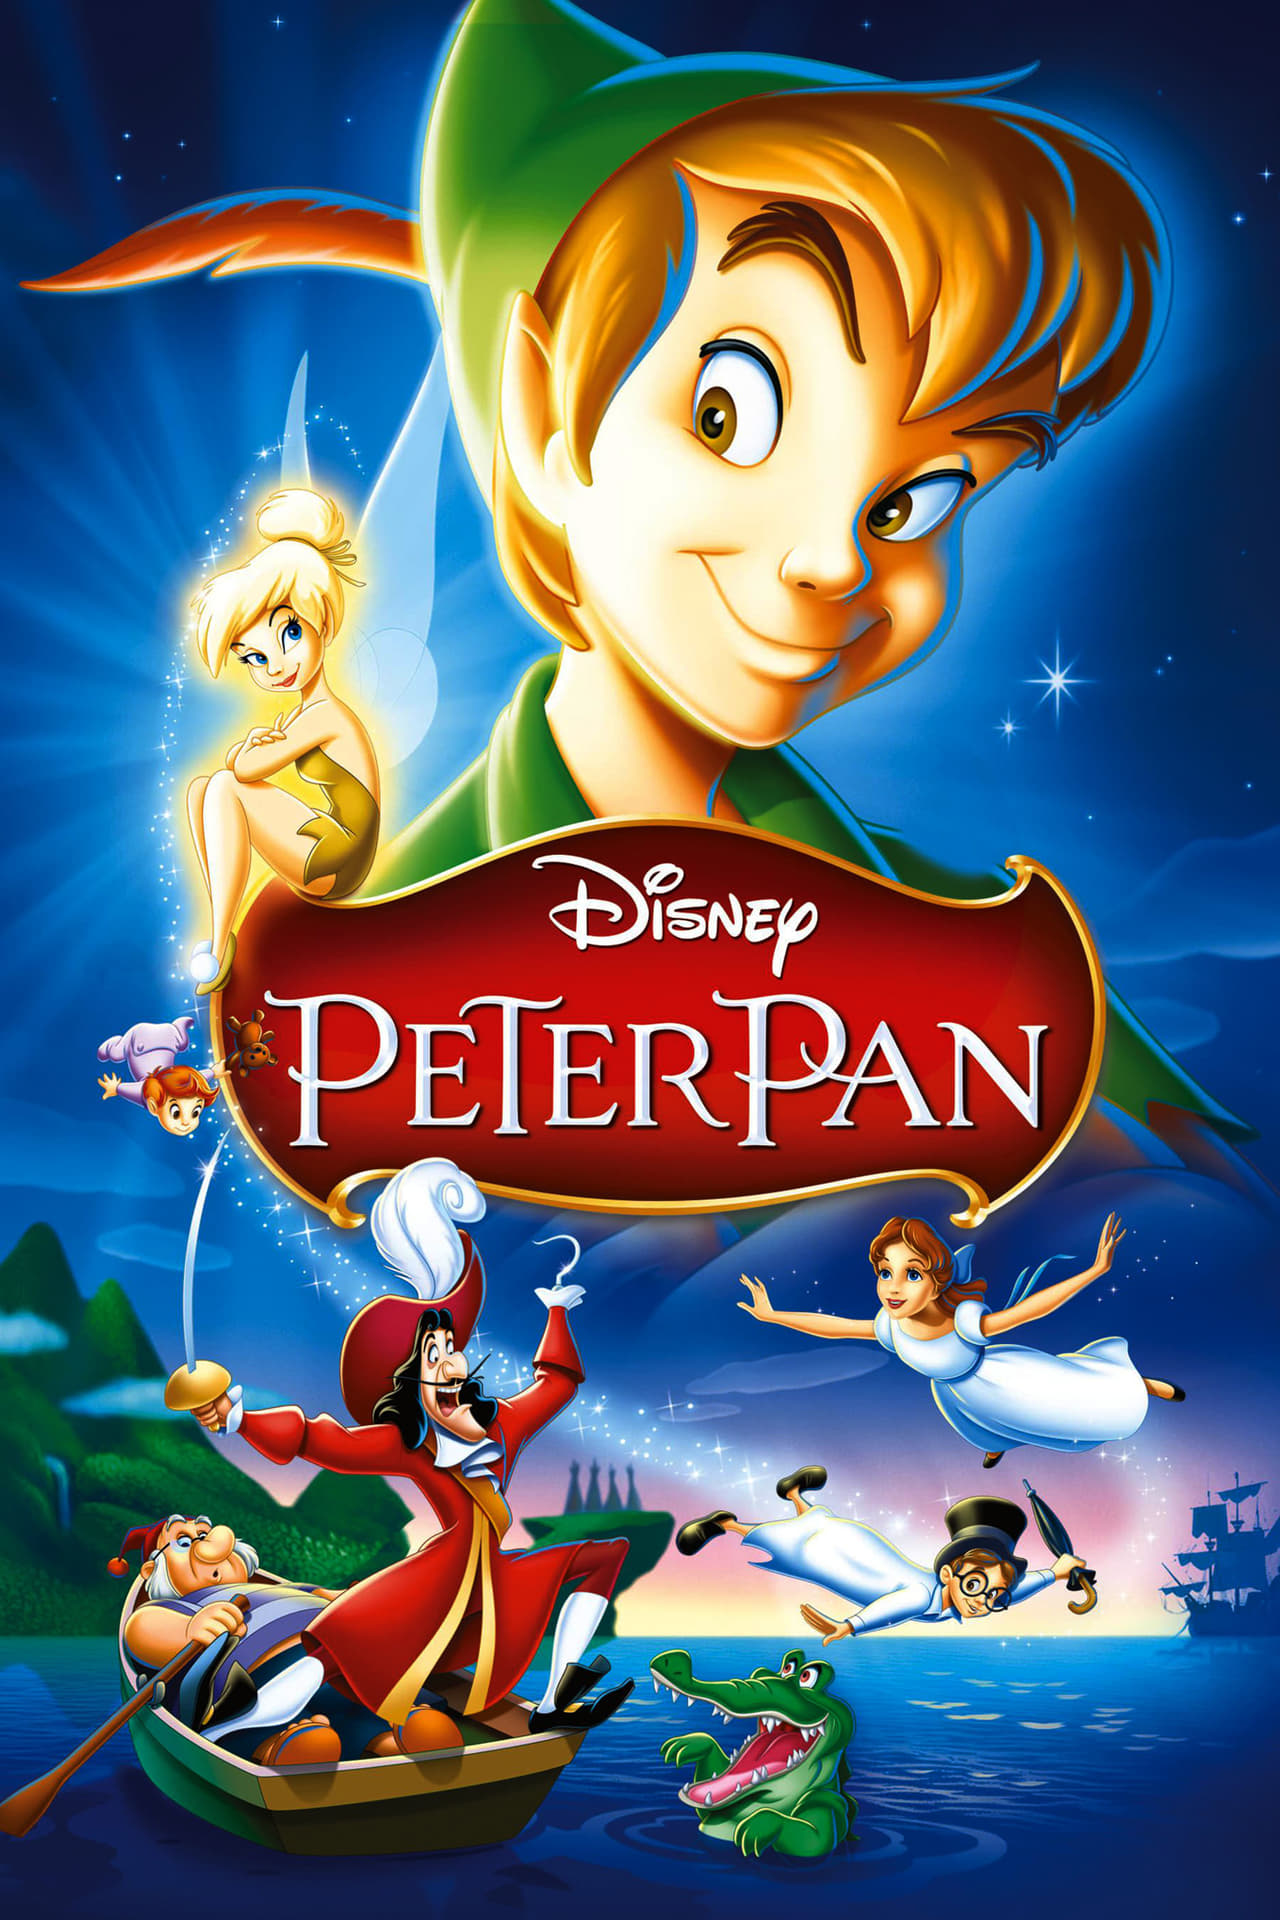 Peter Pan (1953) wiki, synopsis, reviews, watch and download